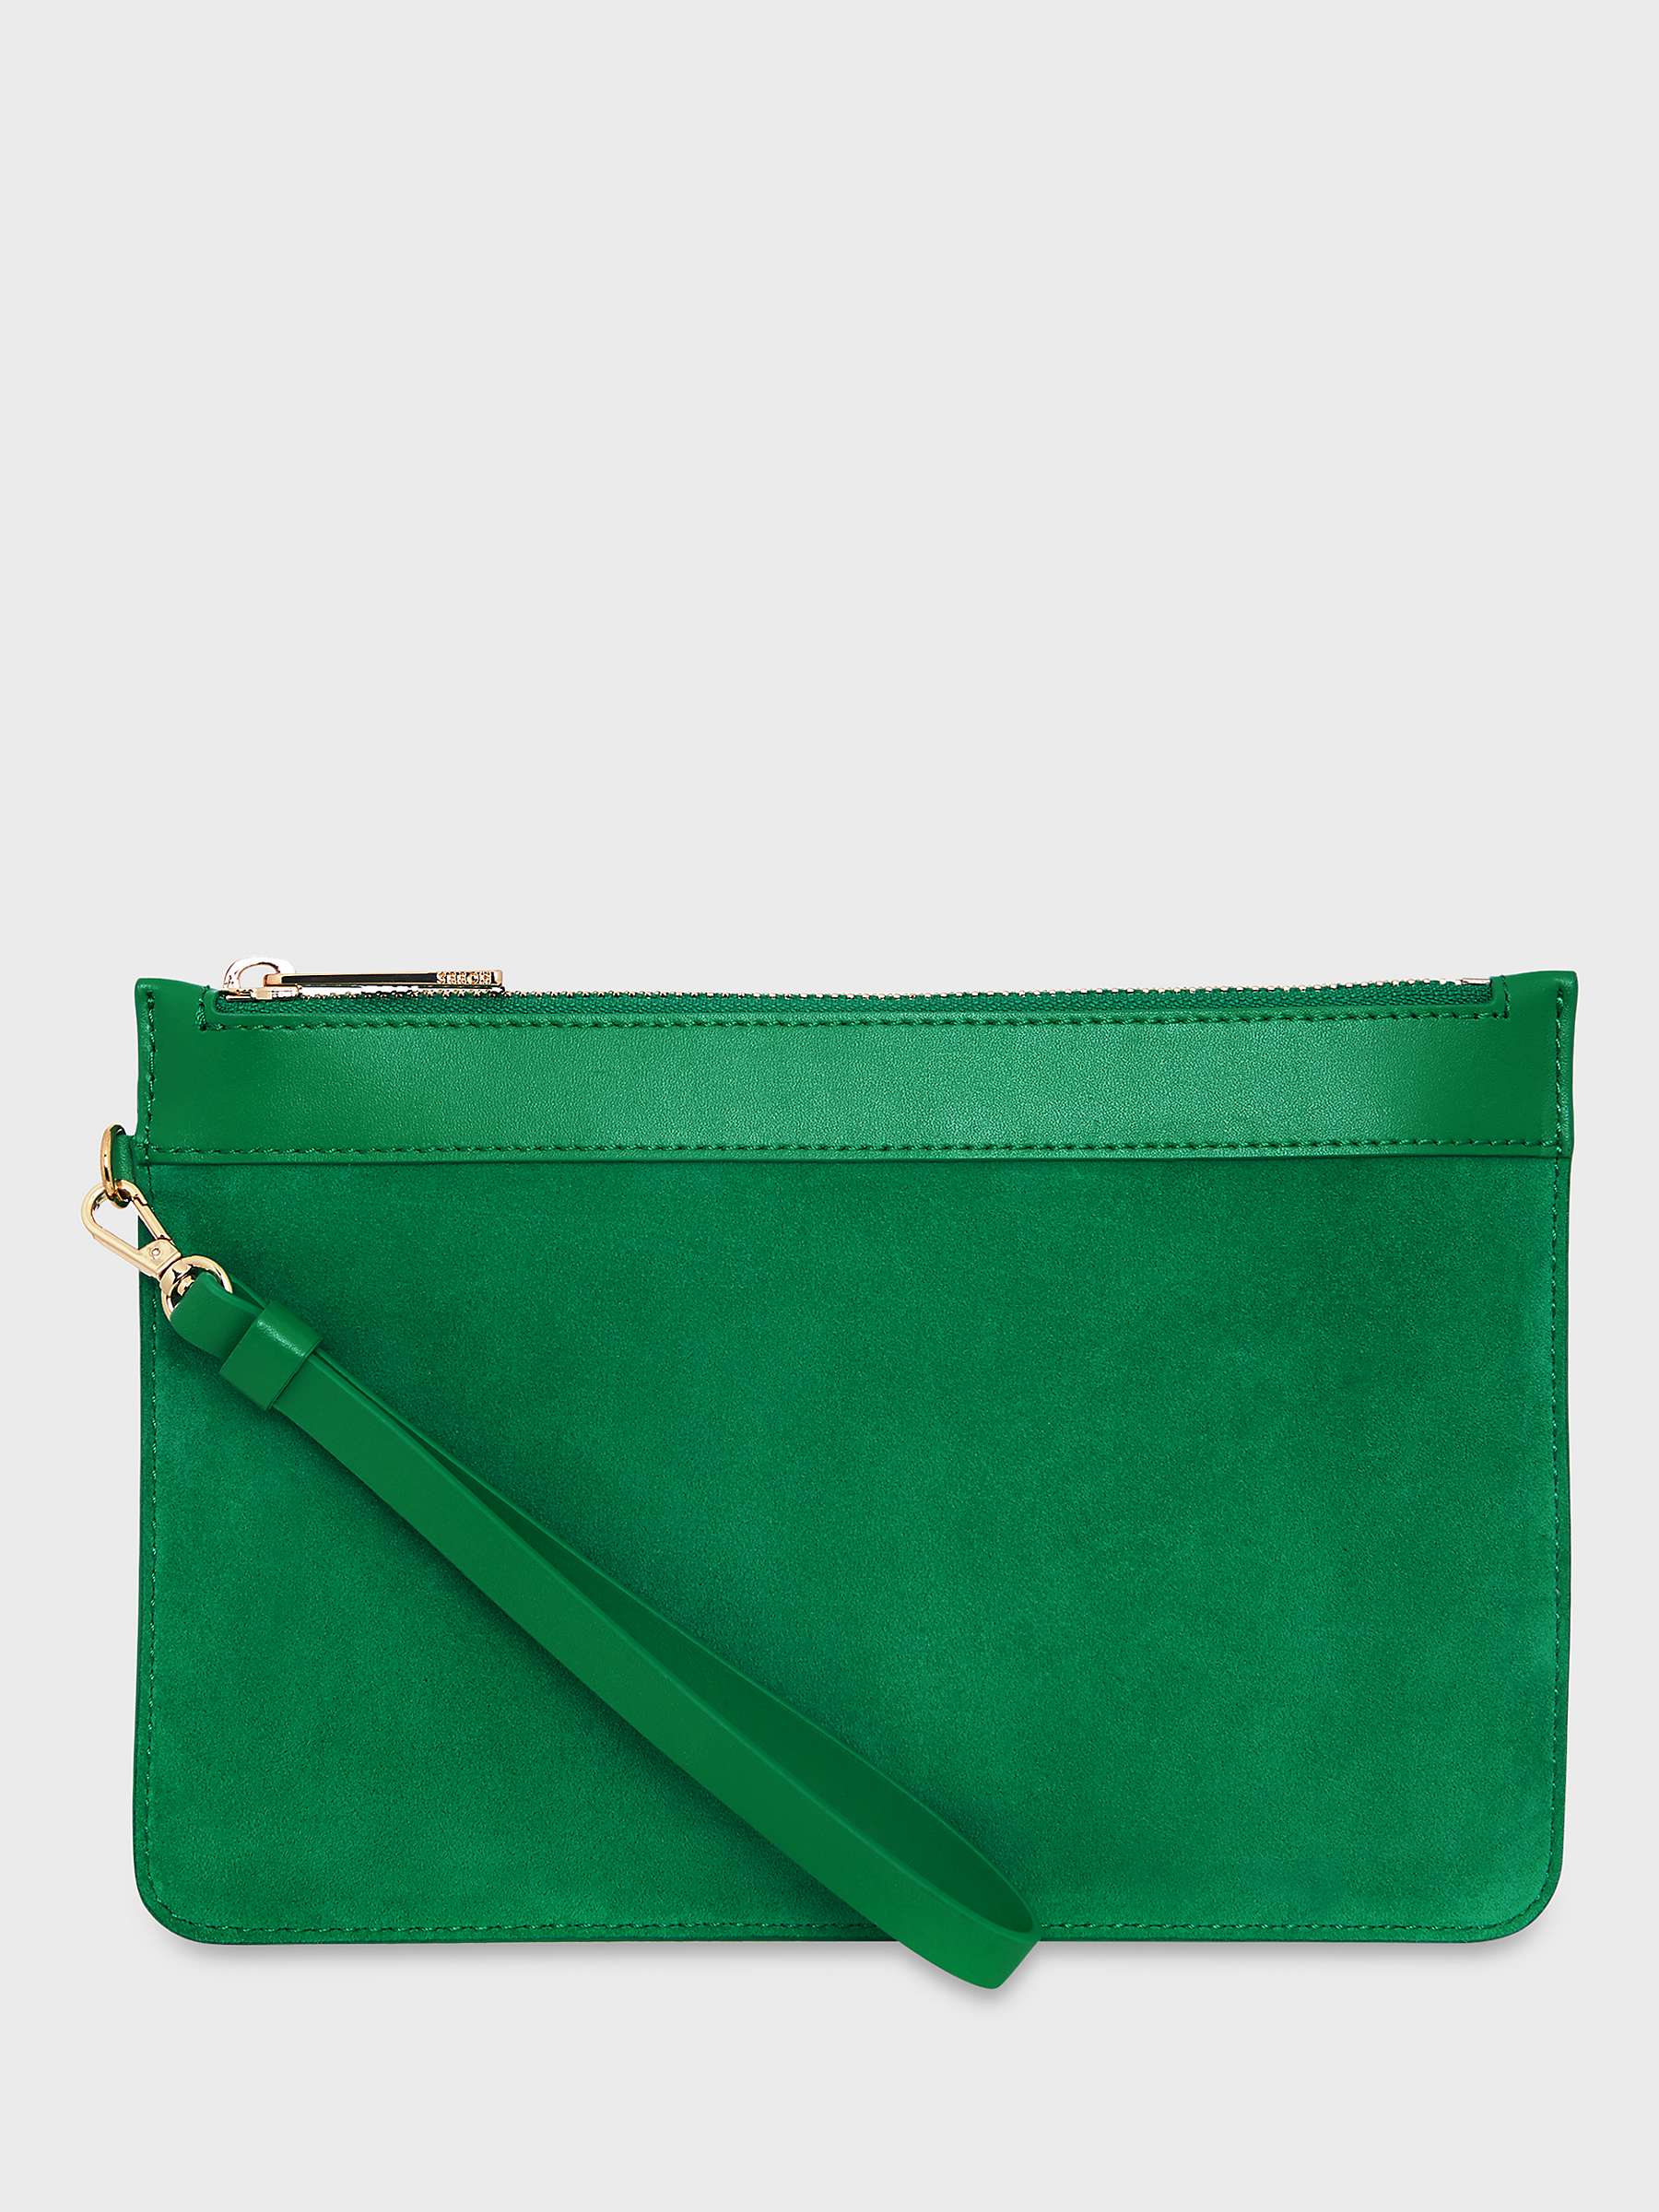 Buy Hobbs Lundy Leather Wristlet, Cilantro Green Online at johnlewis.com